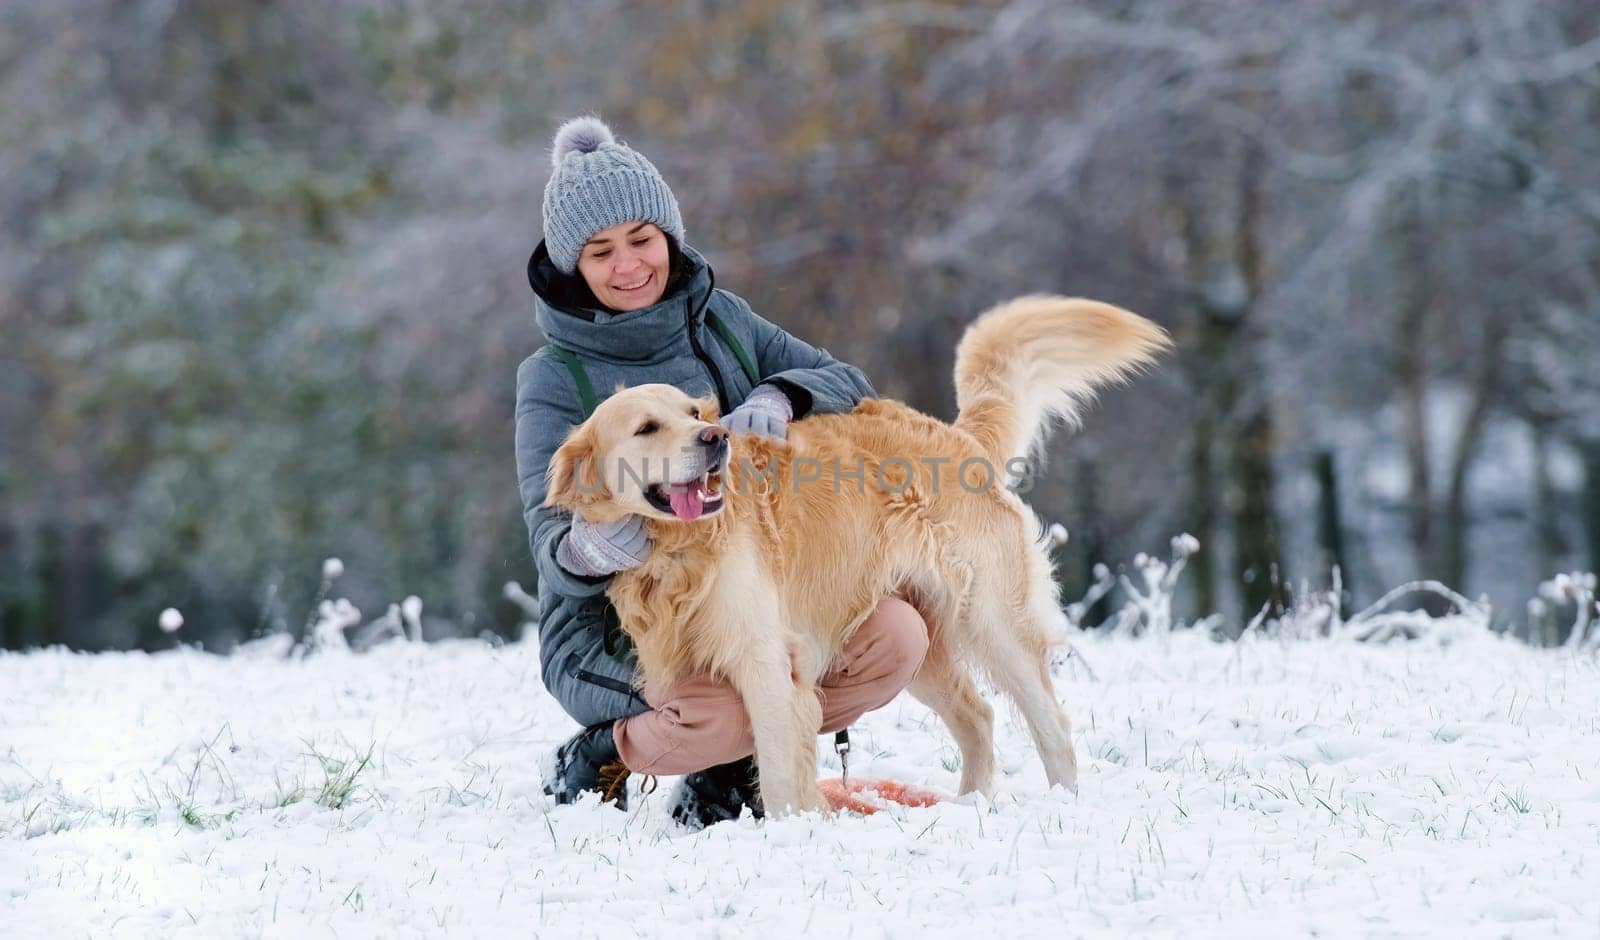 Woman Petting Her Adorable Golden Retriever Dog On A Snow Field In Winter